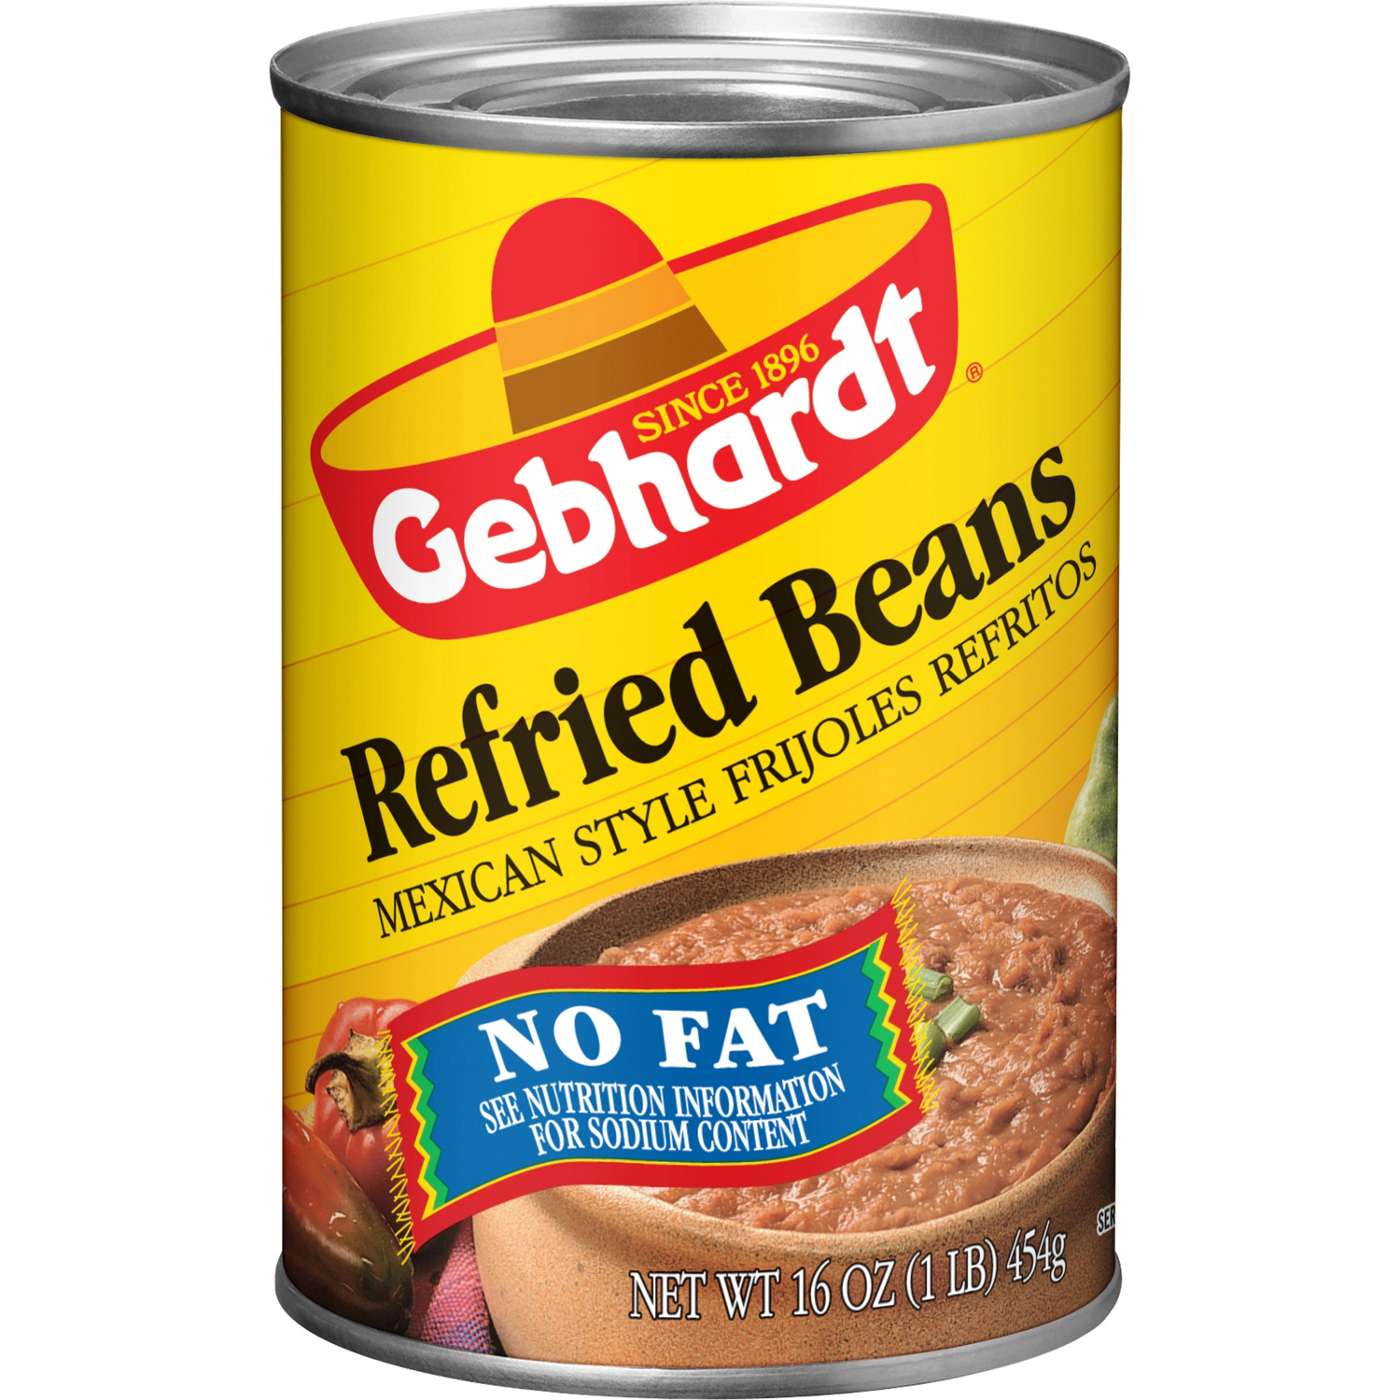 Gebhardt’s Mexican Style Refried Beans Canned Beans; image 1 of 3